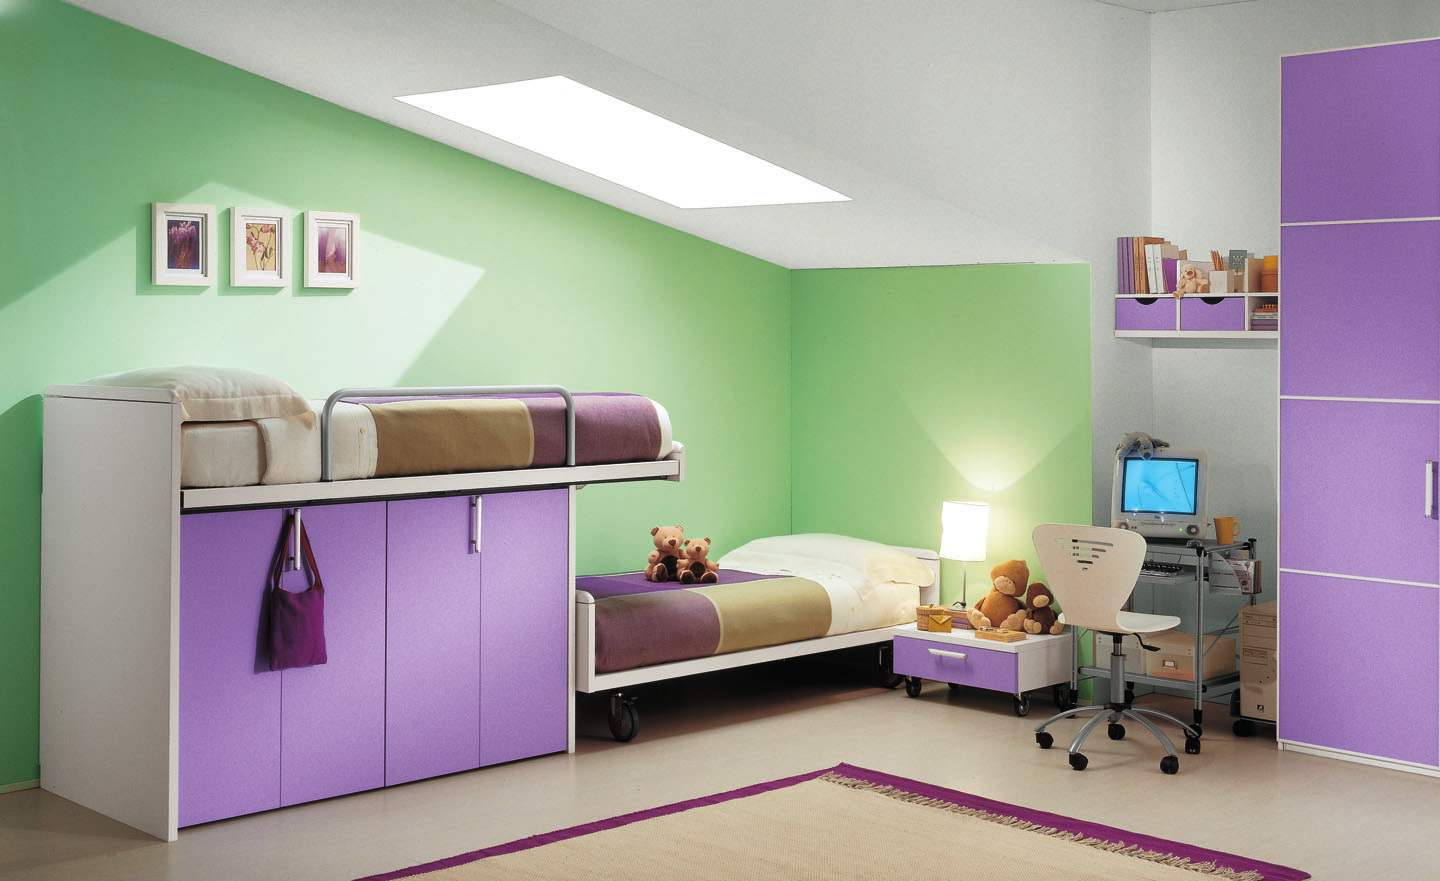 Green Wall Purple Excellent Green Wall Color With Purple Furniture Of Kids Chat Rooms Furnished With Bunk Beds Combined With Cupboards And Completed With Nightstand And Desk Kids Room Design And Furniture Of Kids Chat Rooms